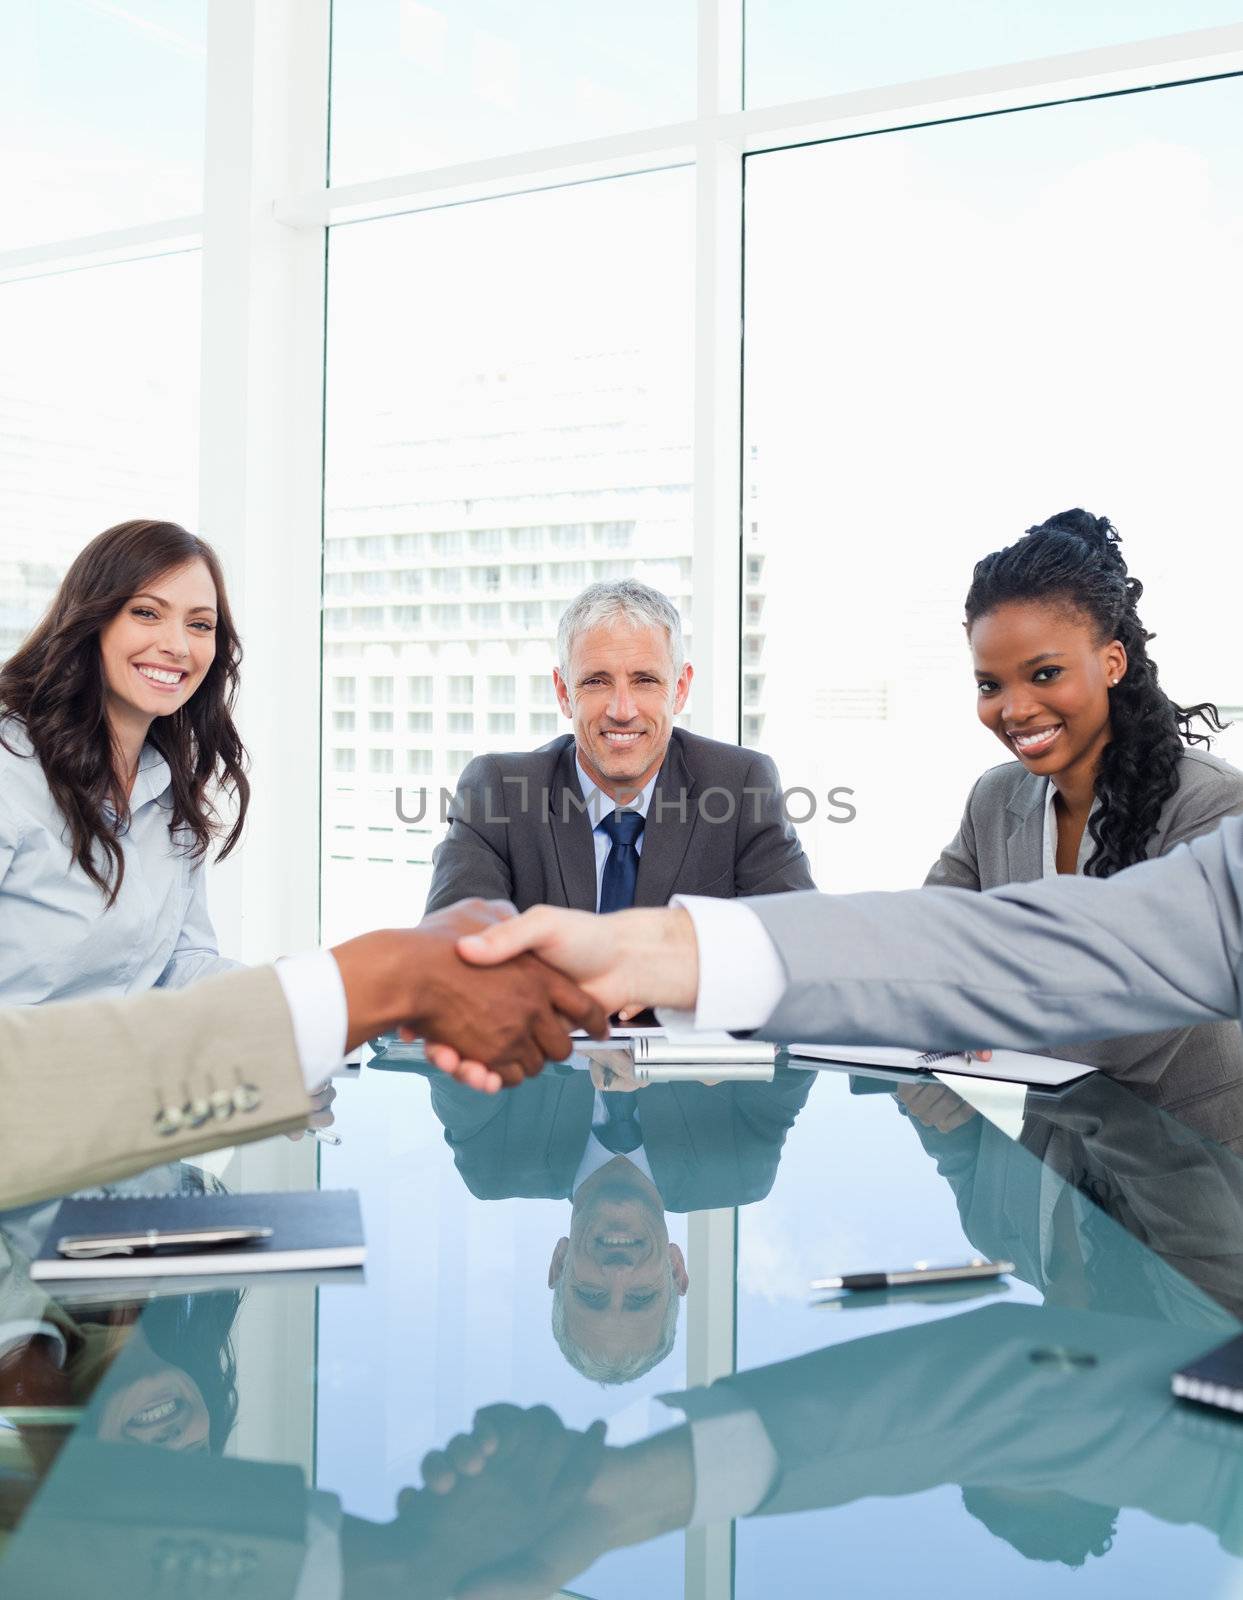 Smiling businesswomen in a meeting looking at co-workers shaking hands